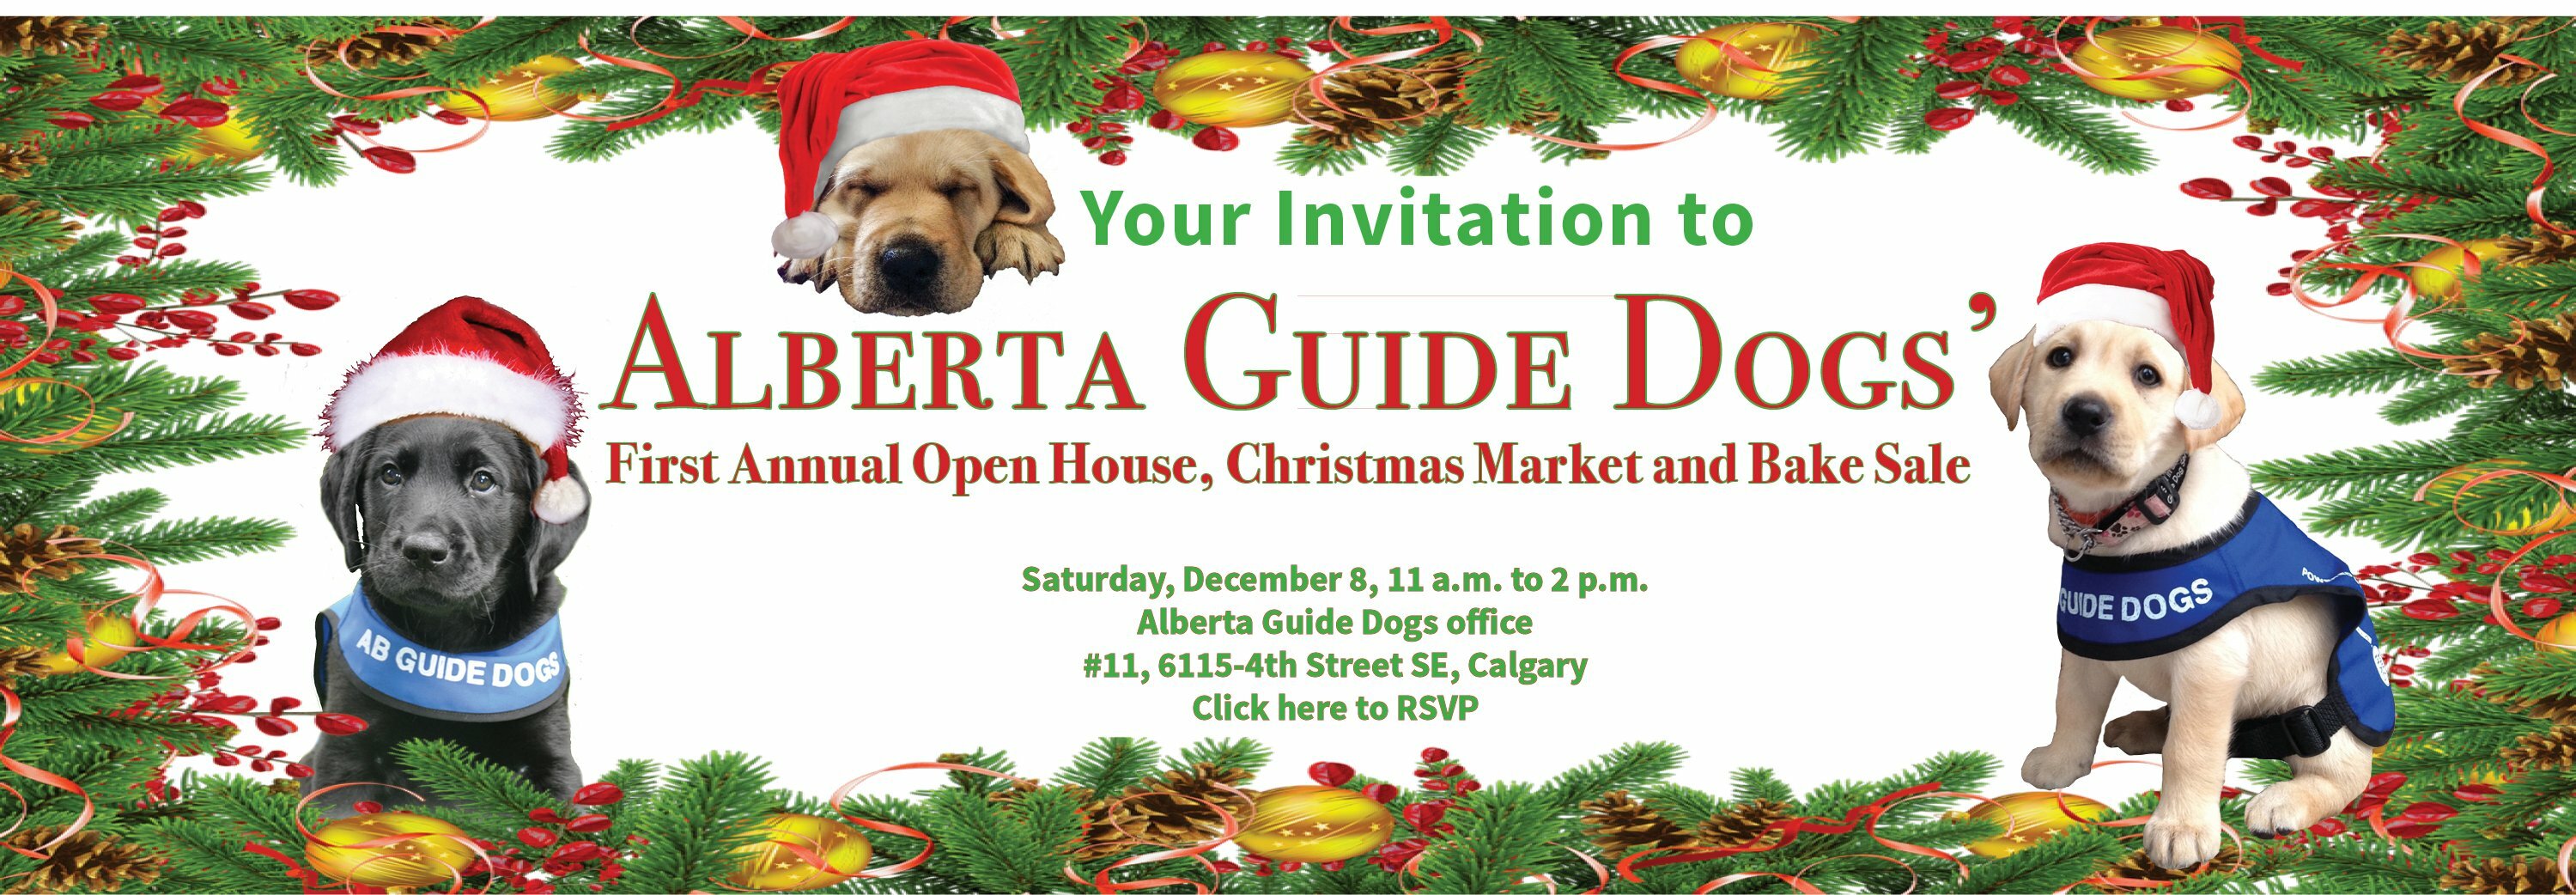 Alberta Guide Dogs hosting Open House